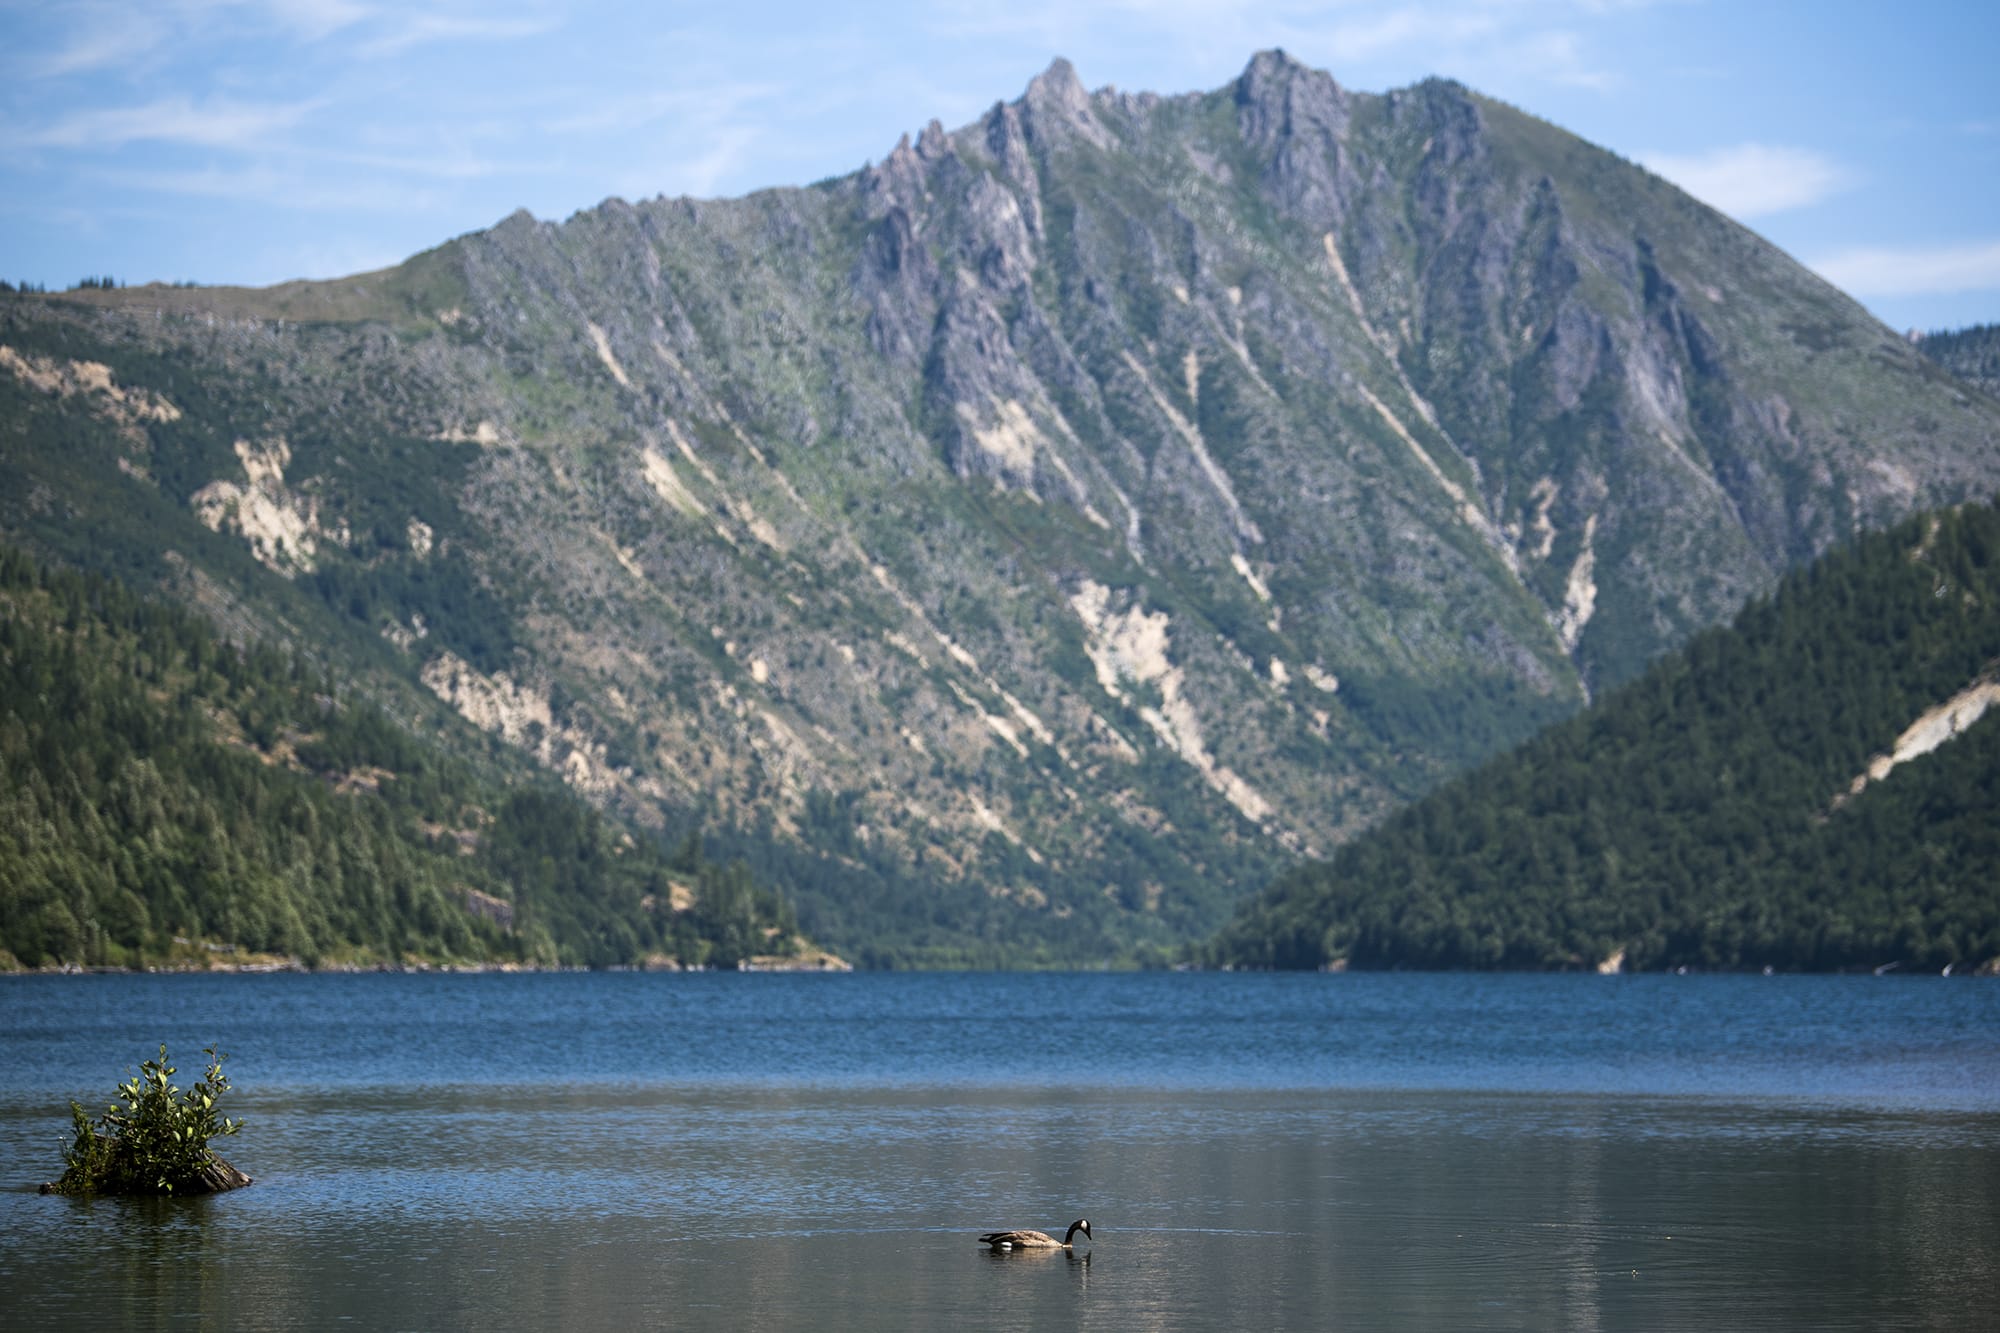 A goose swims in Coldwater Lake next to Mount St. Helens on Wednesday, August 1, 2018.